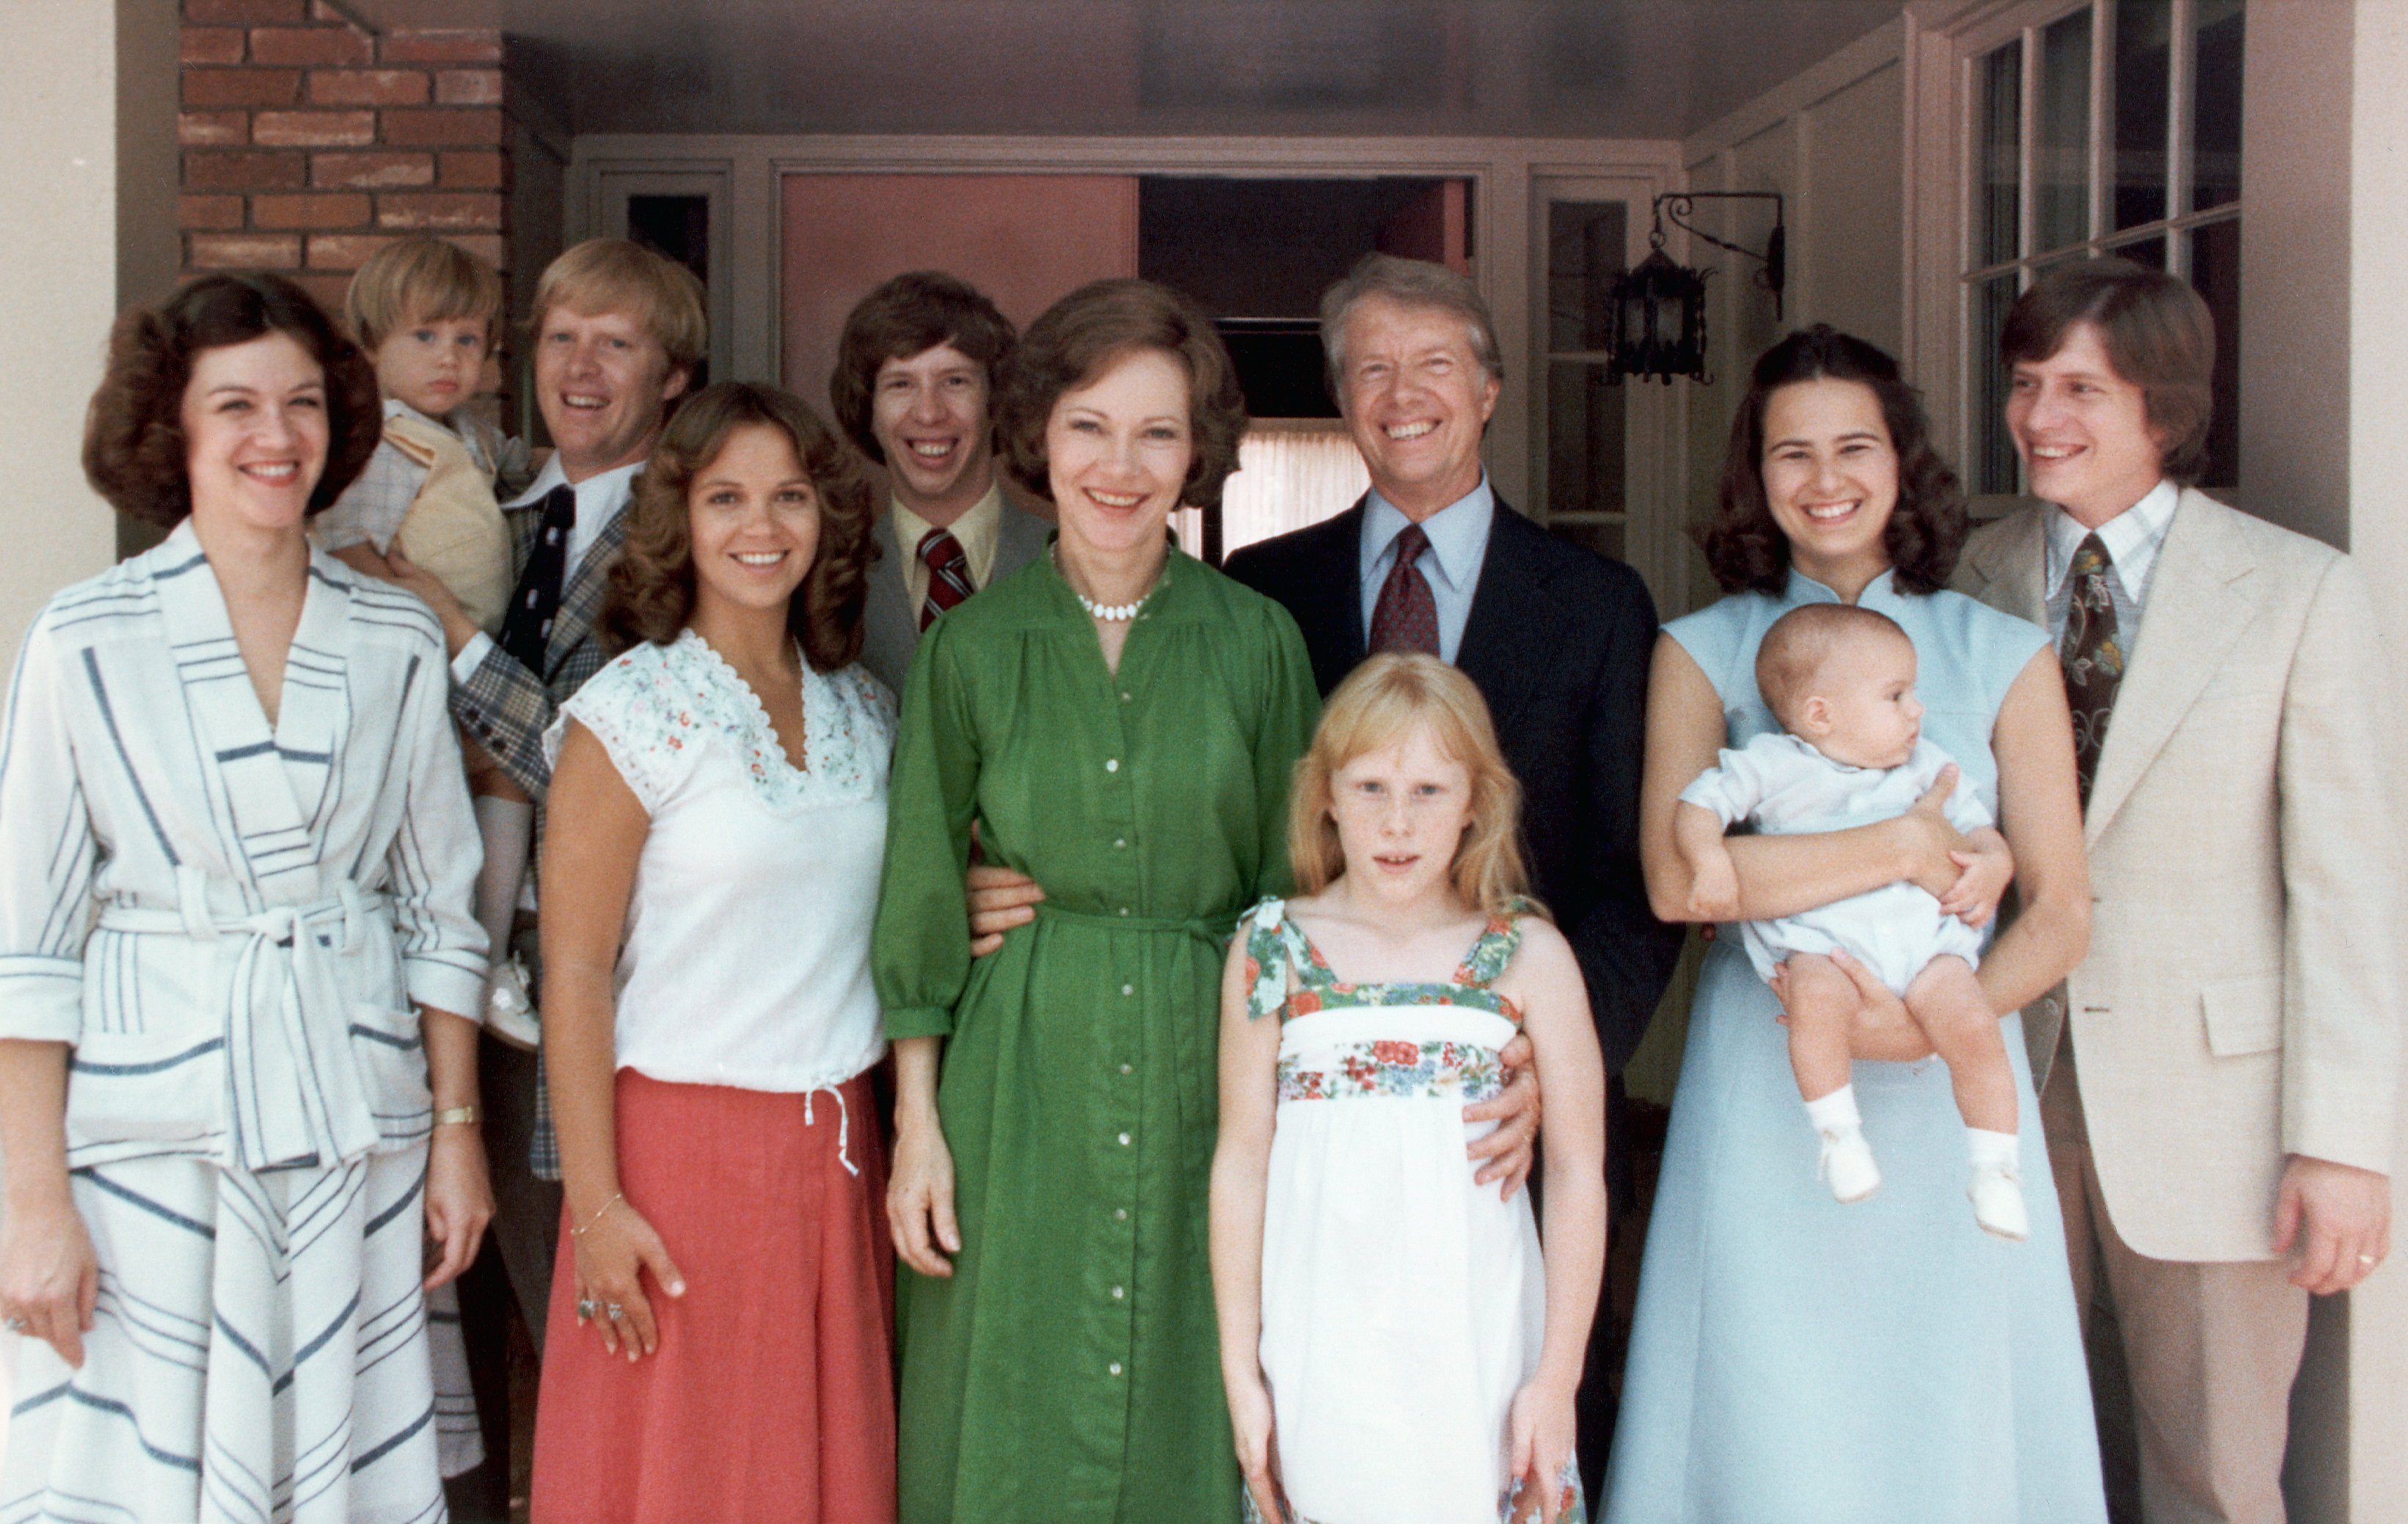 Jimmy Carter and his extended family, (L-R): Judy, Jason James, Jack, Annette, Jeff, Rosalynn, Amy Lynn, Jimmy, Caron Griffin Carter holding James Earl Carter IV, and son Chip Carter pose for a photo in January 1977. | Source: Getty Images